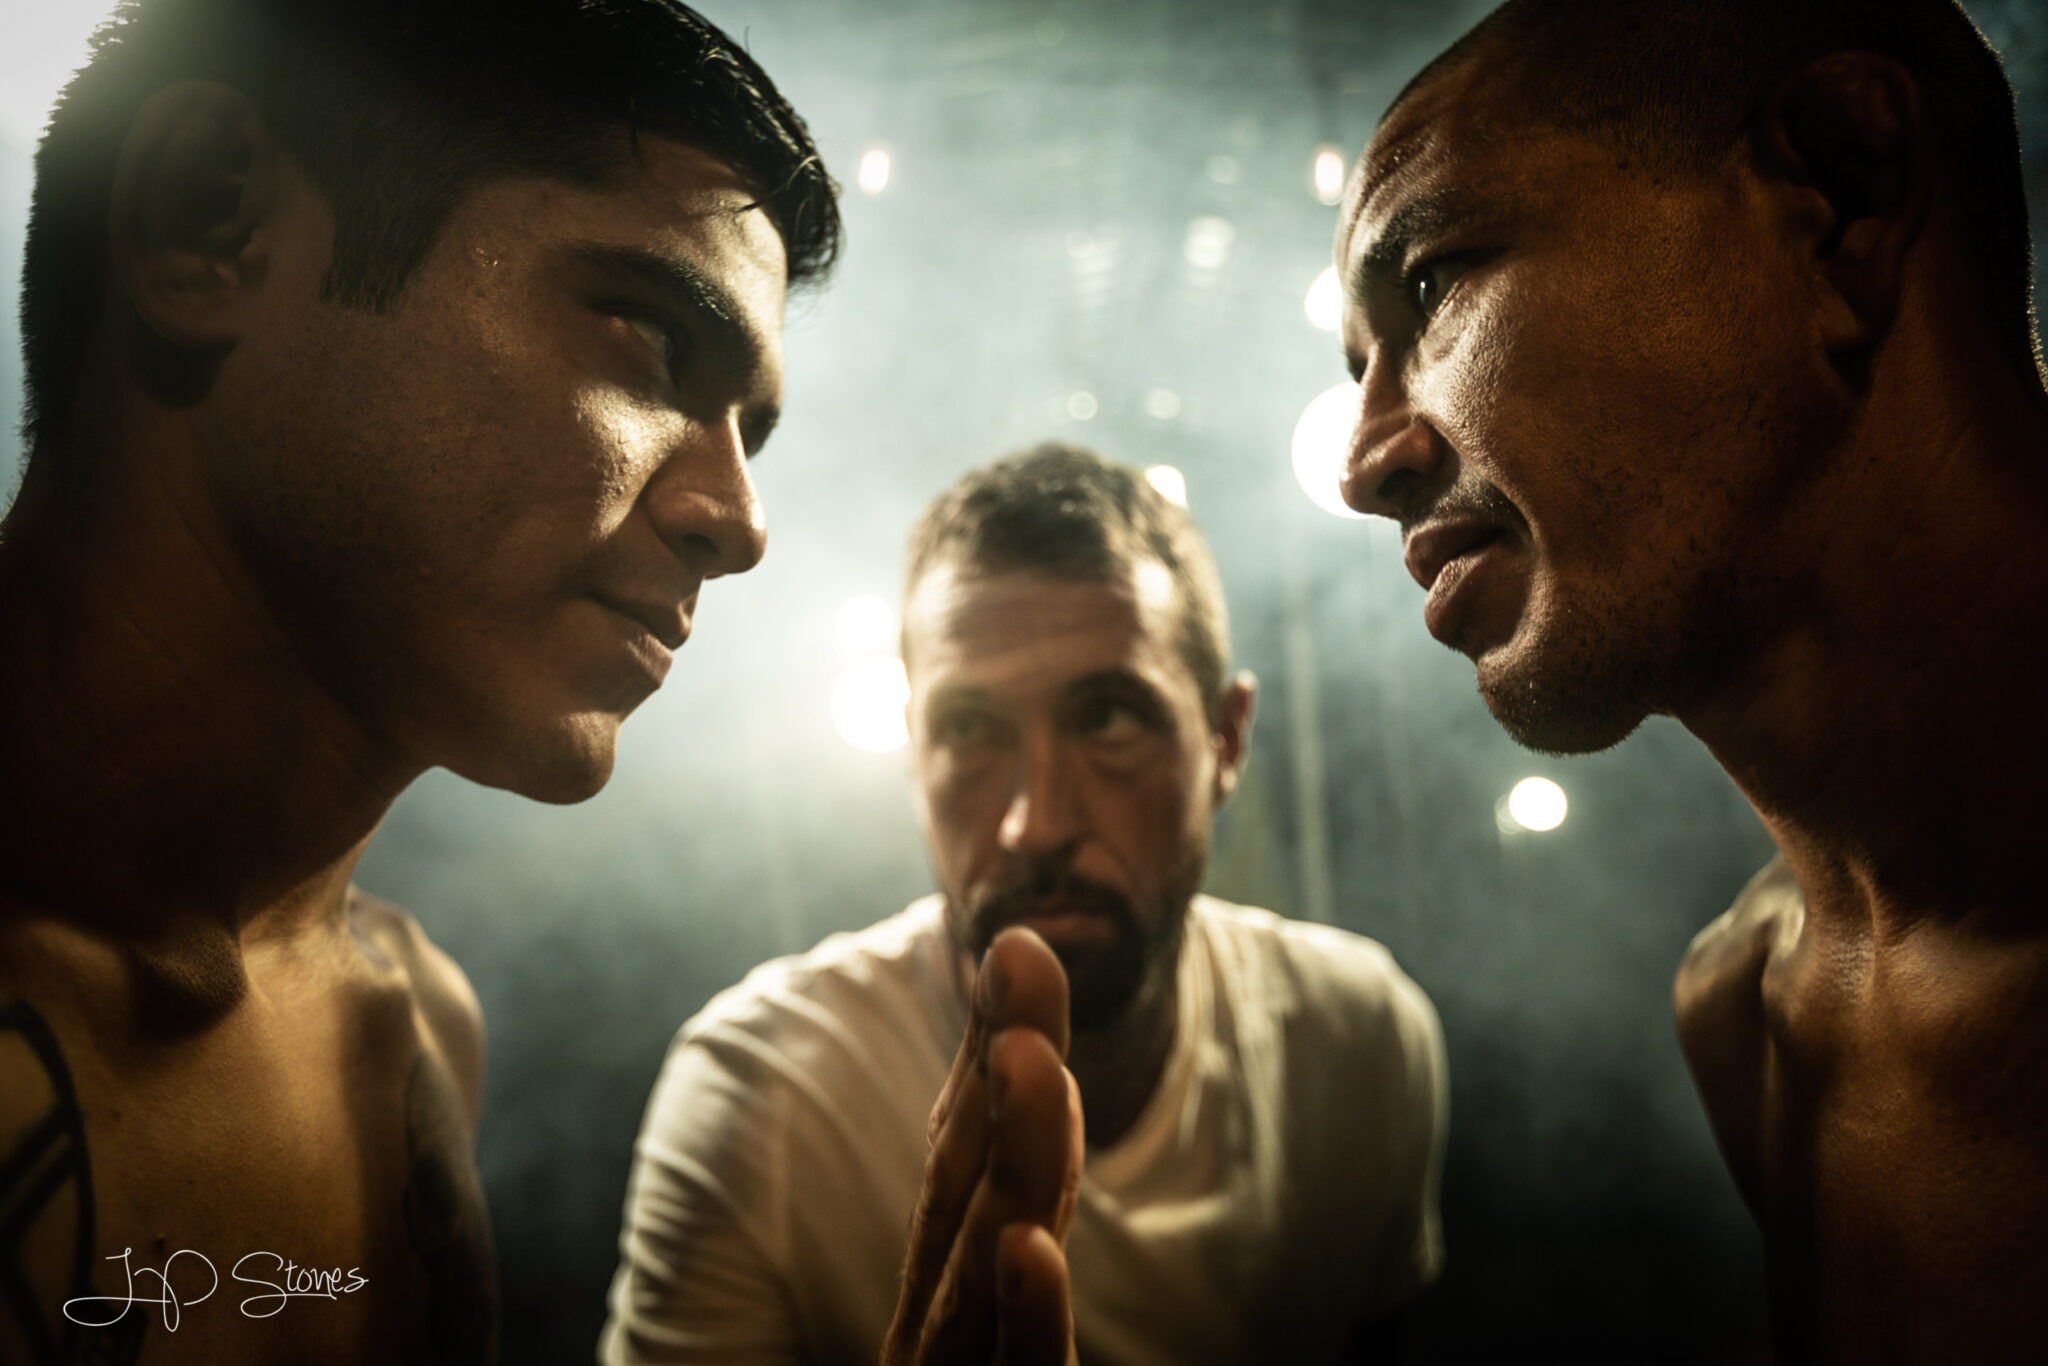 Boxing Visual Storytelling by JP Stones Photography Workshops